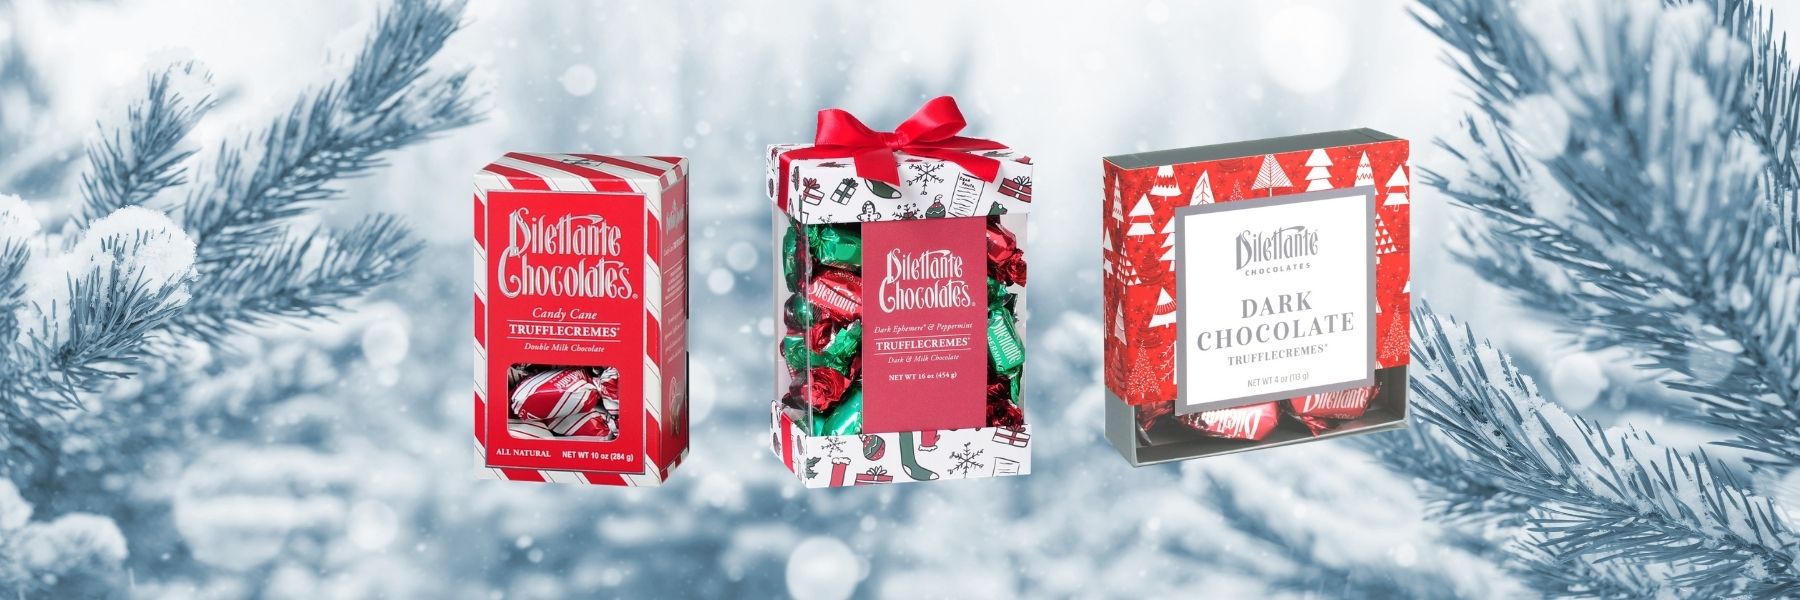 Dilettante Chocolates Holiday Gift Collection Featuring Peppermint Cane TruffleCremes, Christmas Gift Boxes, and More